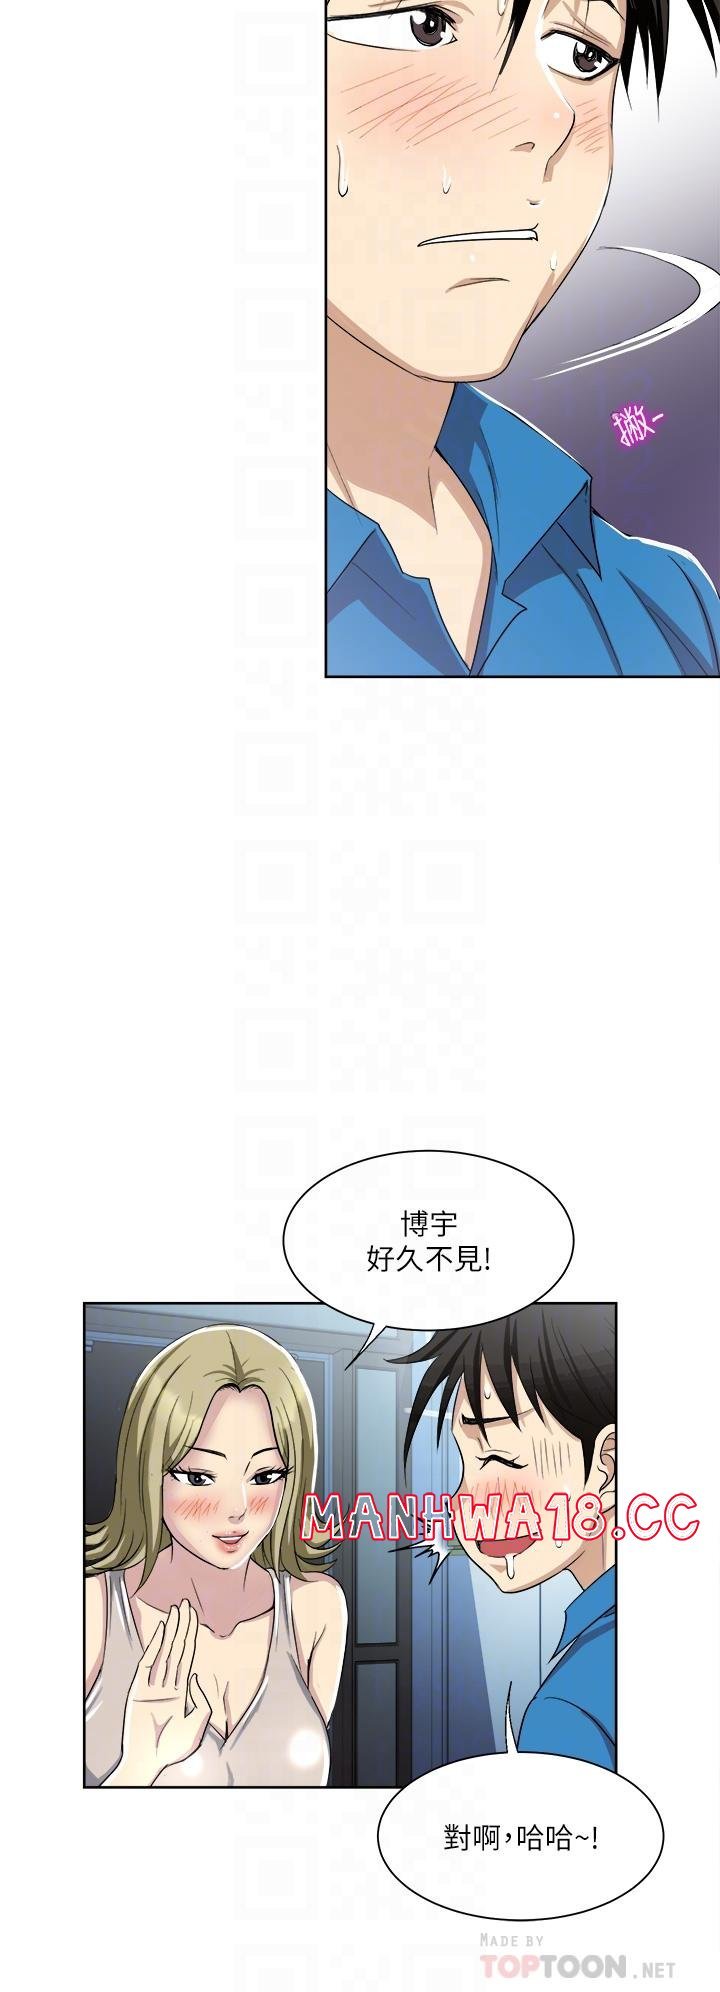 just-once-raw-chap-2-17